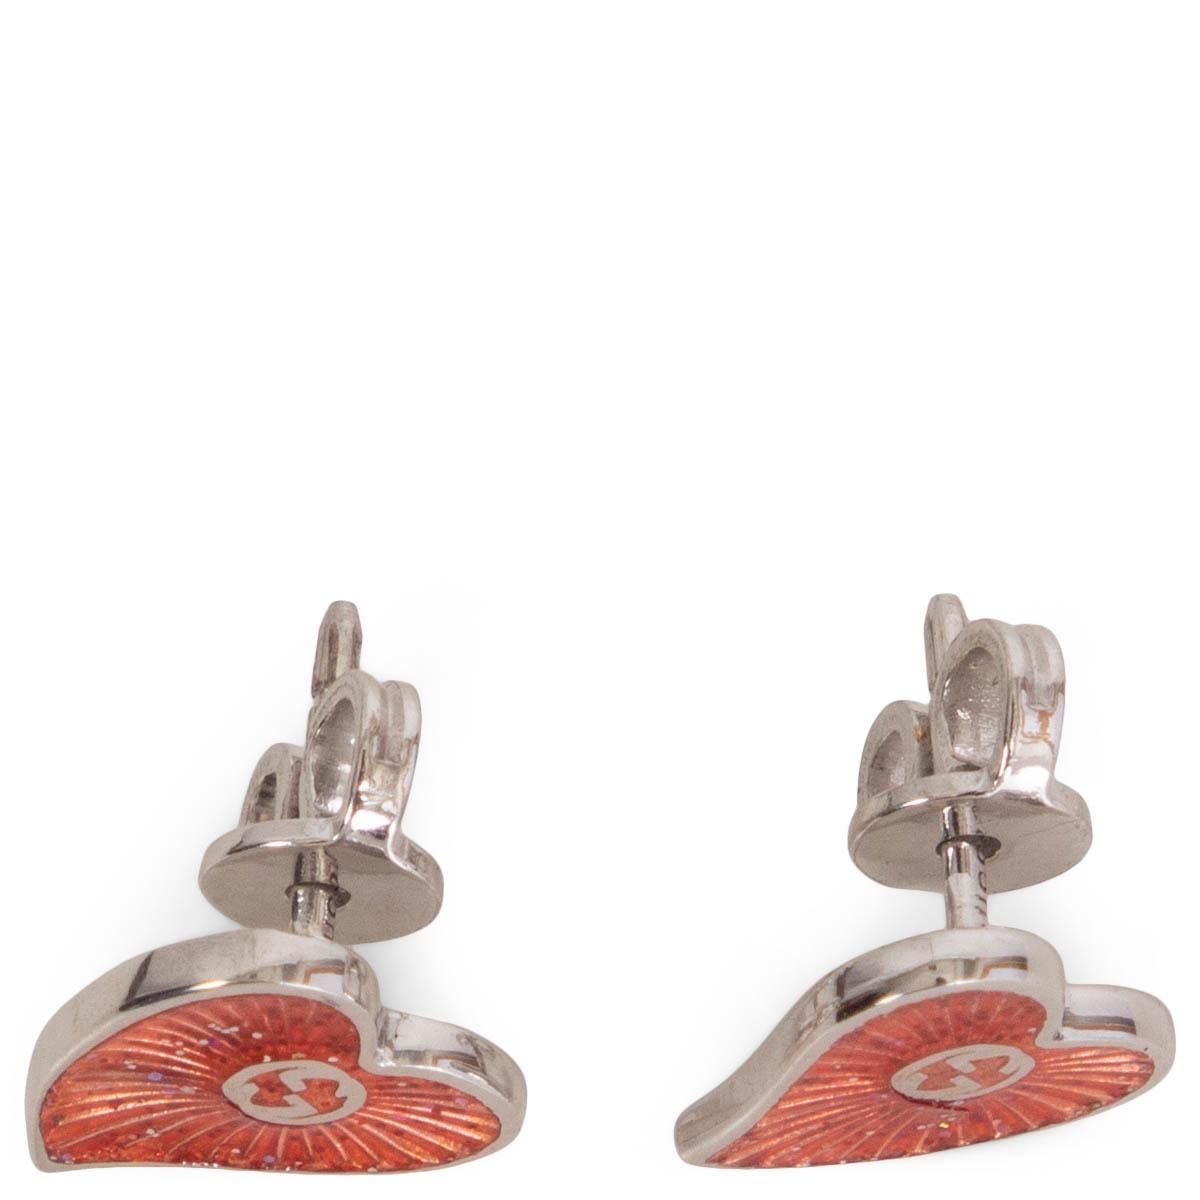 100% authentic Gucci heart enamelled earrings in red and silver sterling silver. Feature a 'GG' on the front. Have been worn once and are in excellent condition. Matching necklace available in separate listing. Come with dust bag and